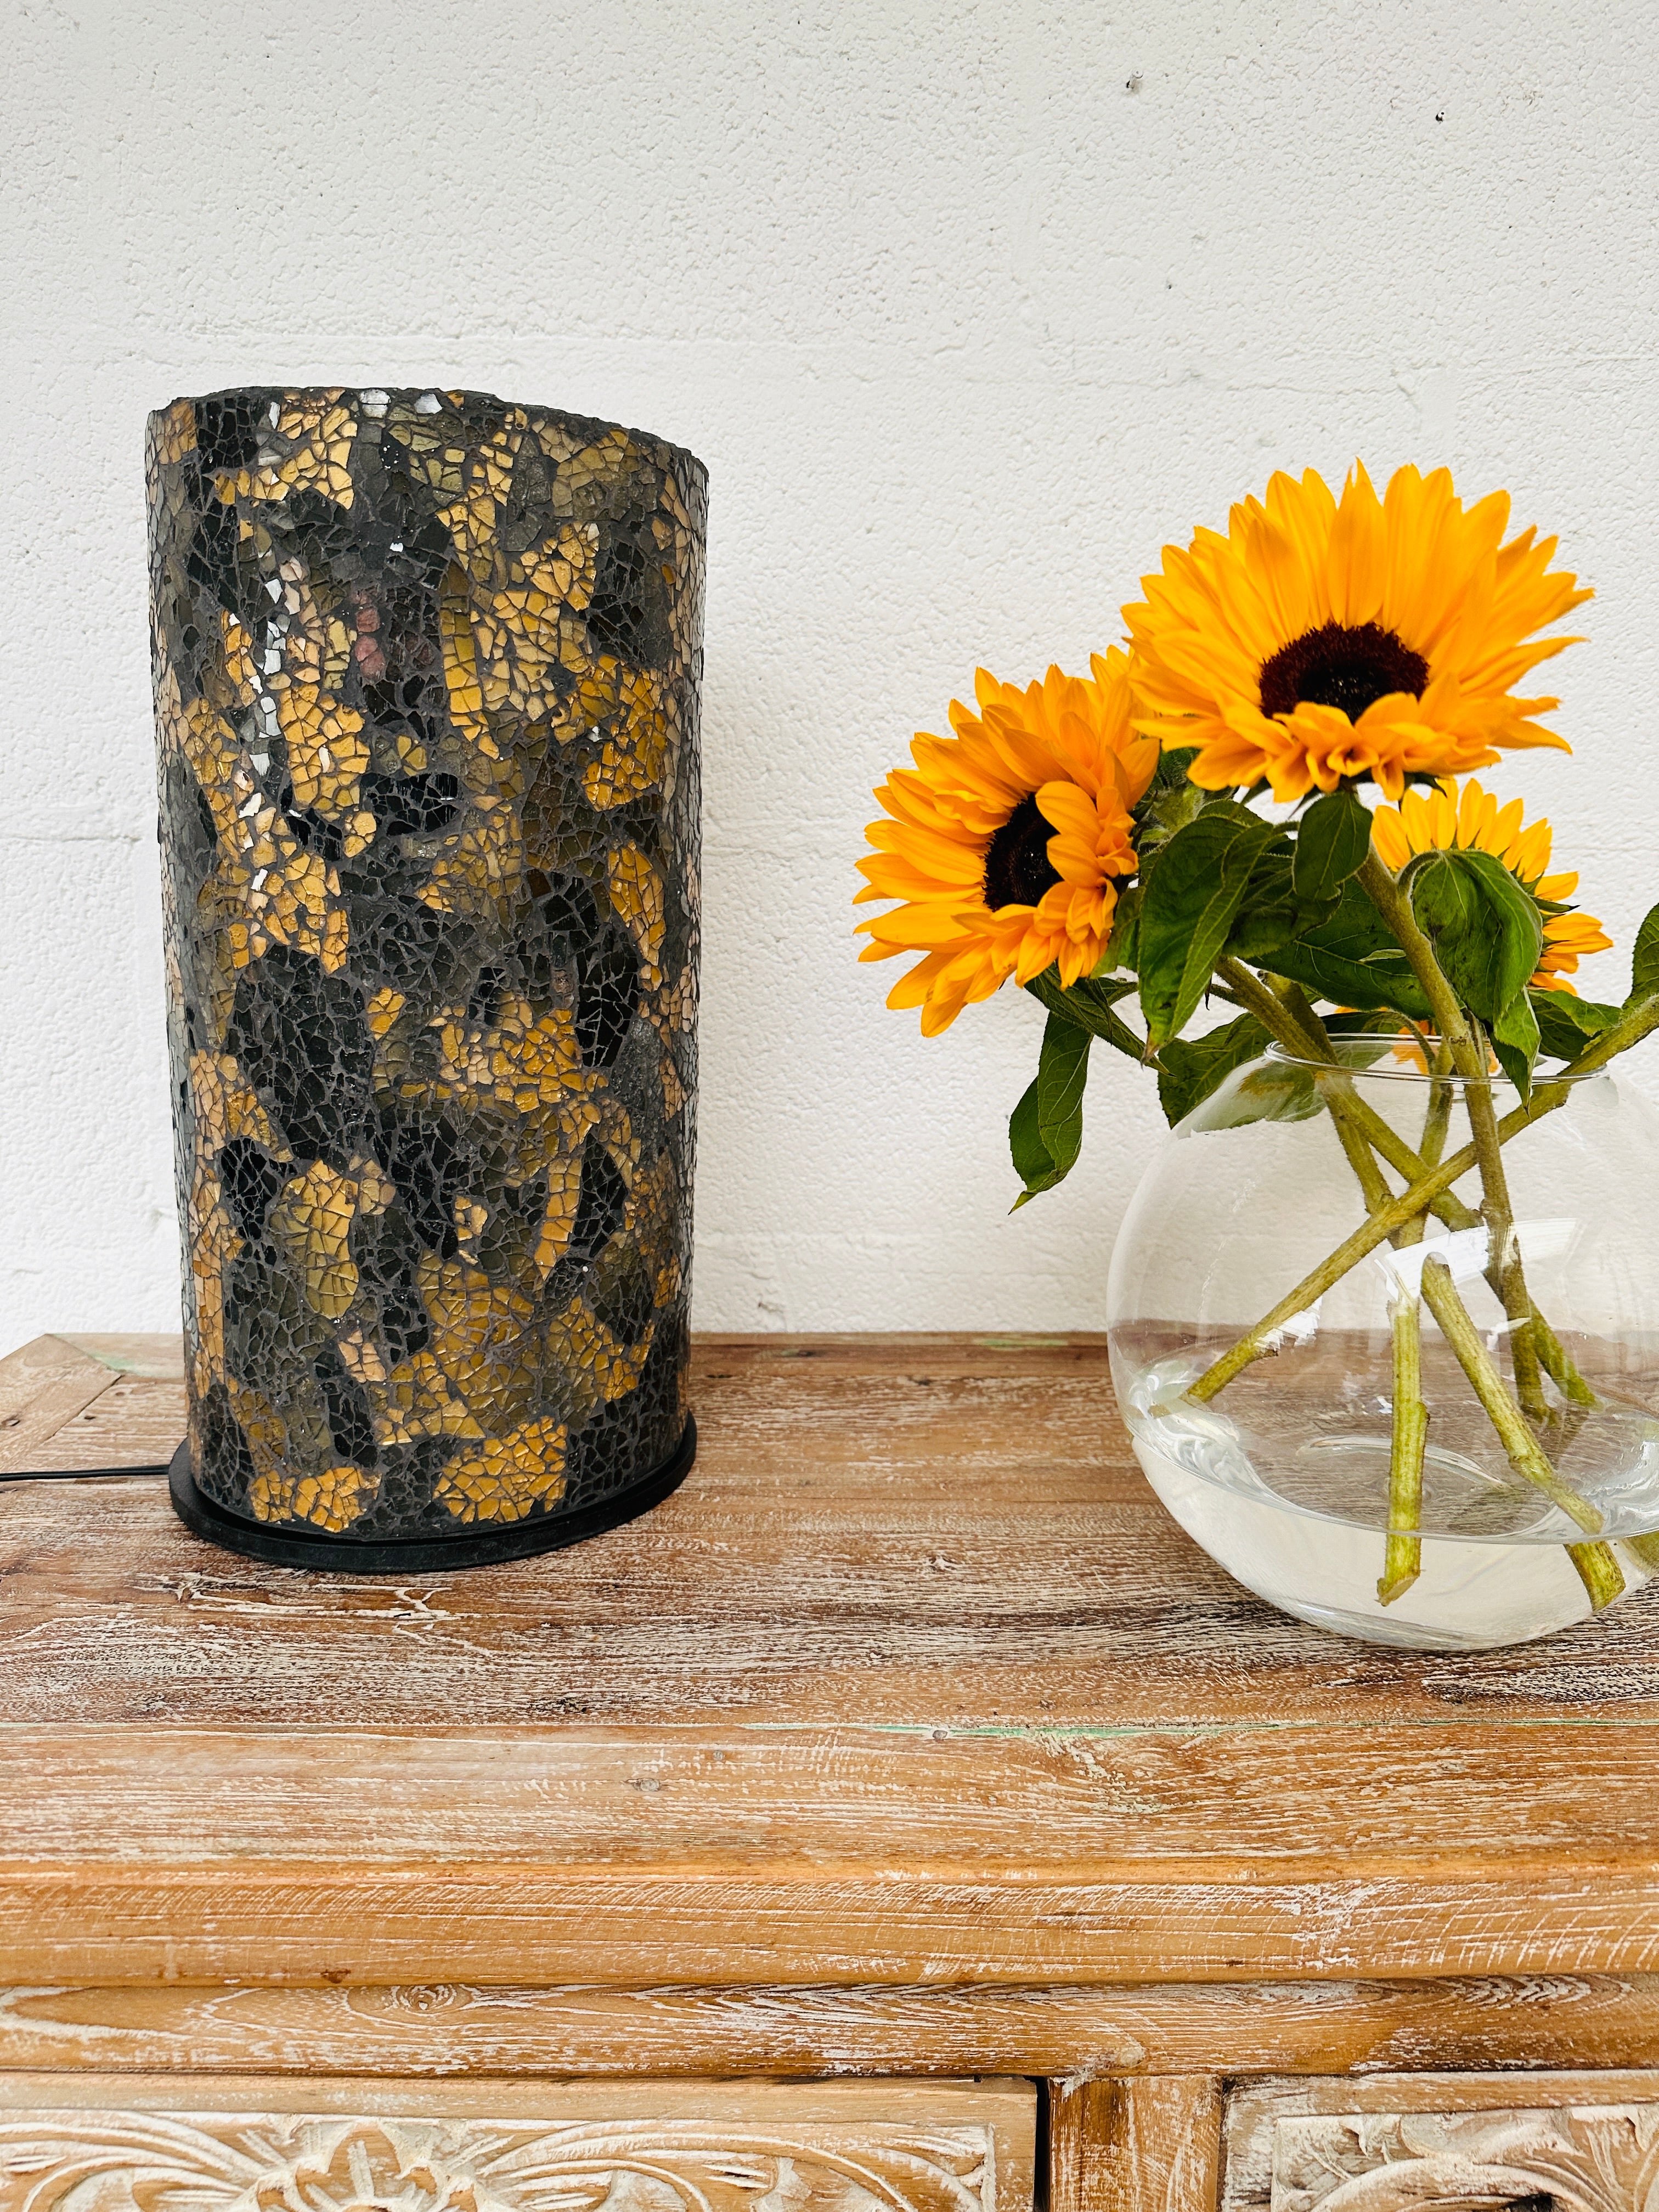 display view of mosaic cylinder lamp light off next to a vase of sunflowers